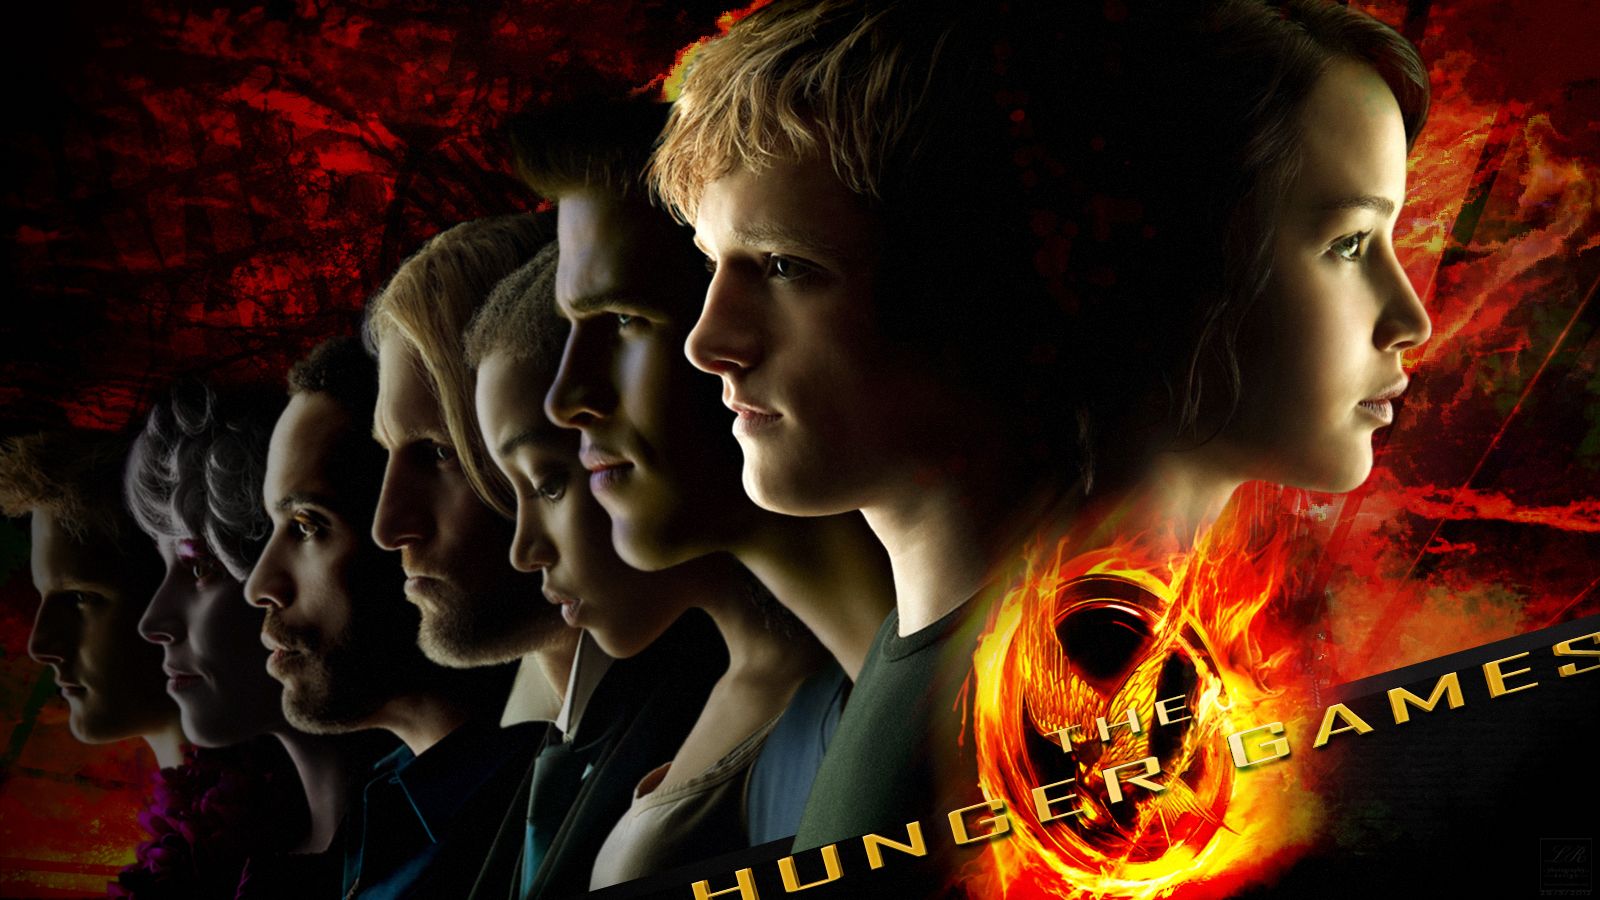 Free download The Hunger Games image The Hunger Games wallpaper photo 30366729 [1600x900] for your Desktop, Mobile & Tablet. Explore The Hunger Games Wallpaper. Catching Fire Wallpaper, Hunger Games